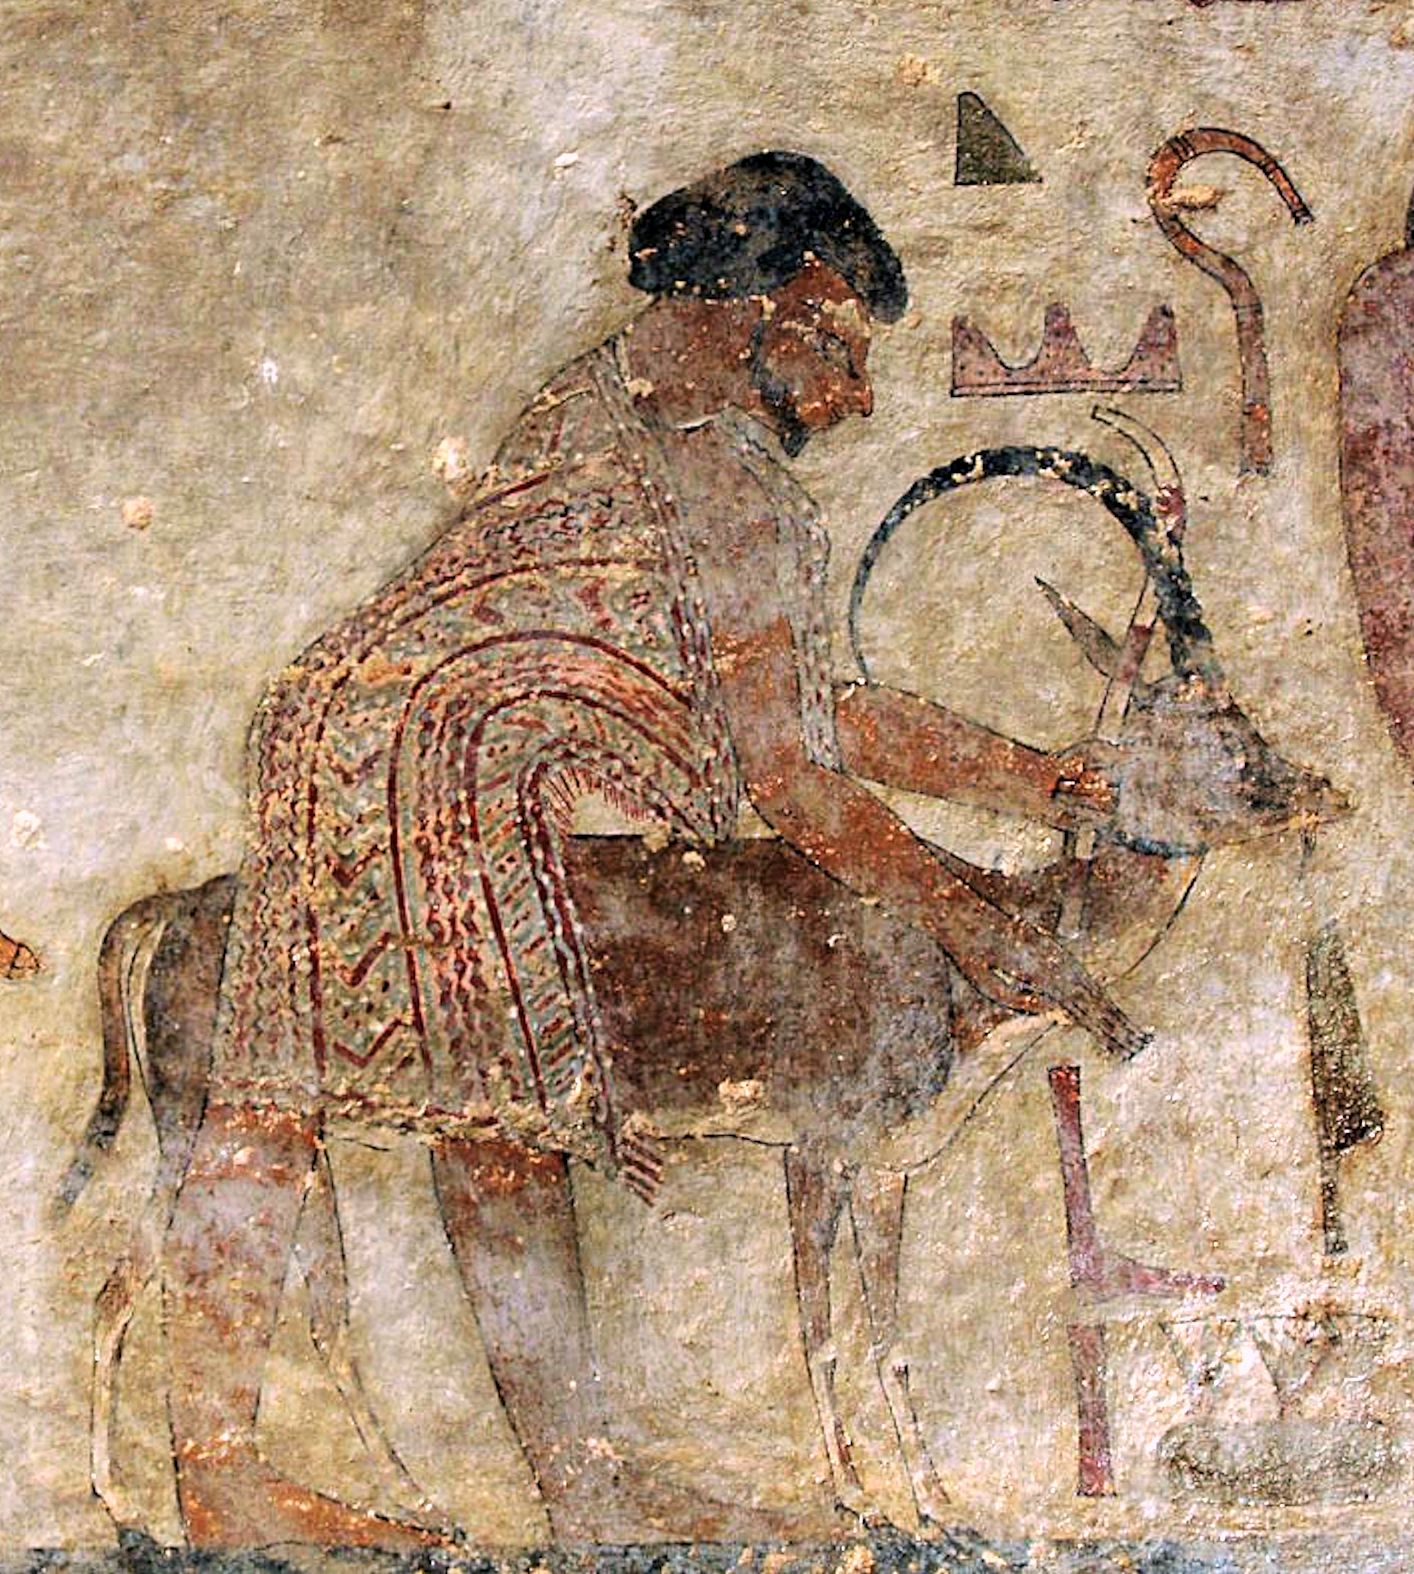 Painting_of_foreign_delegation_in_the_tomb_of_Khnumhotep_II_circa_1900_BCE_%28Detail_mentioning_%22Abisha_the_Hyksos%22_in_hieroglyphs%29.jpg